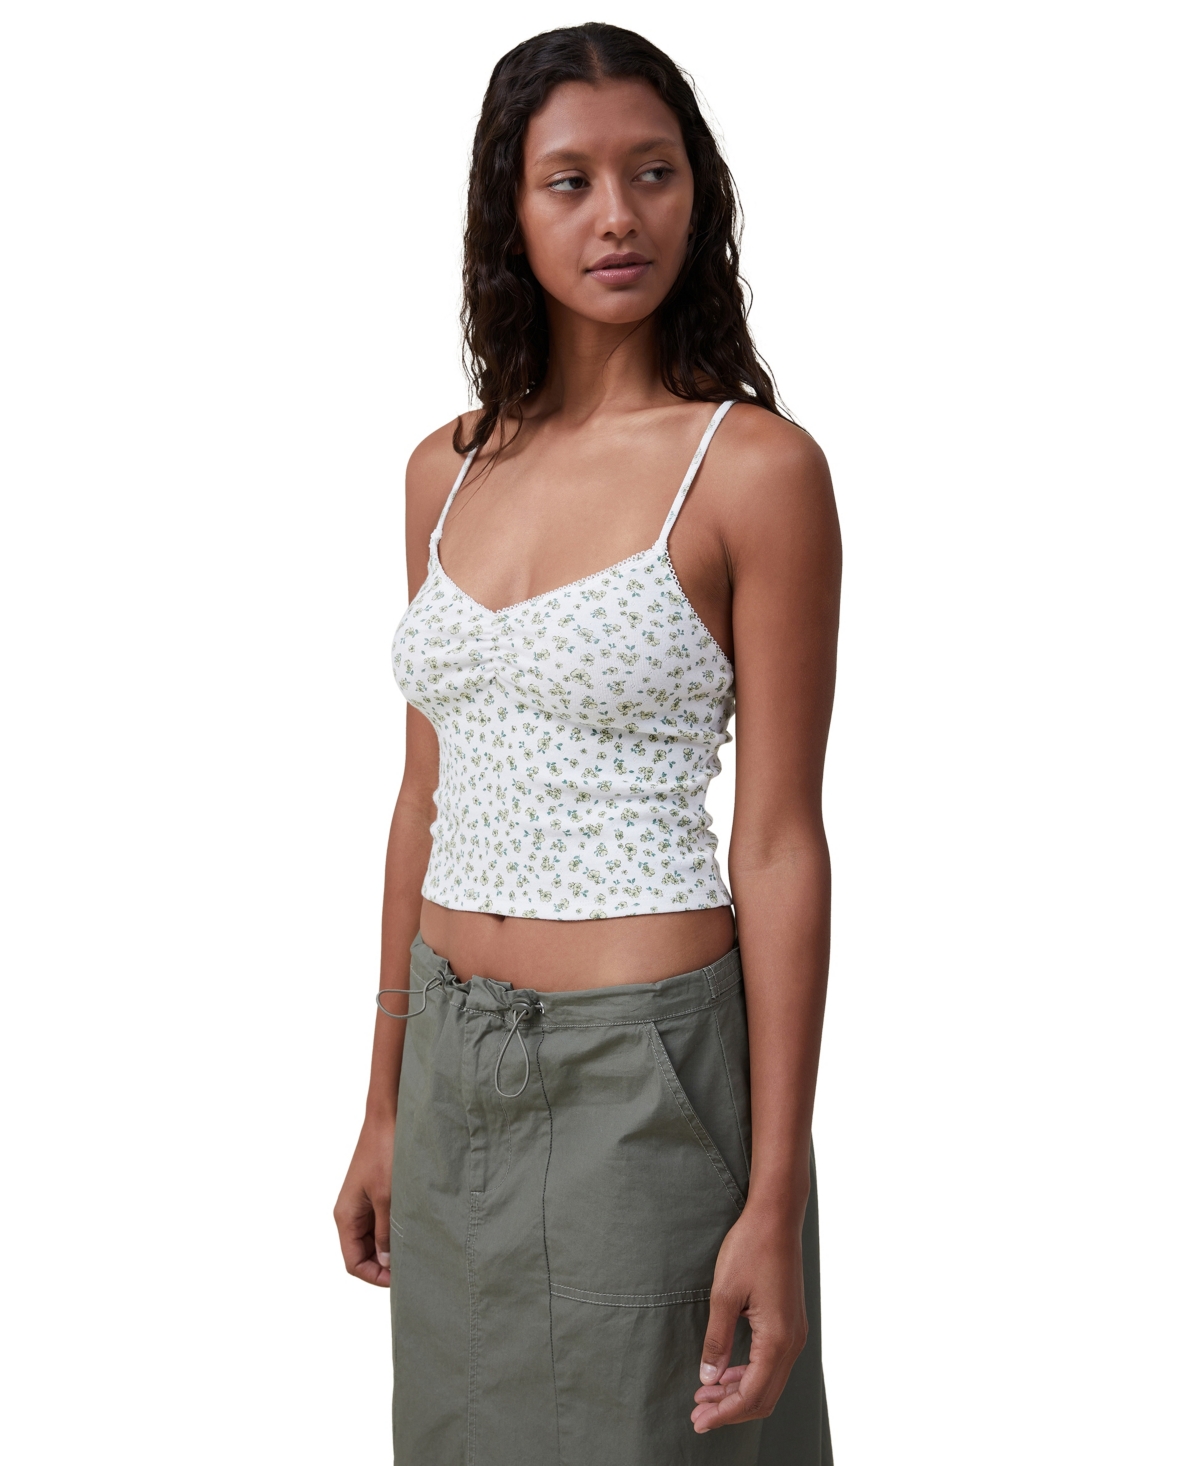 Cotton On Women's Claudia Pointelle Camisole Top